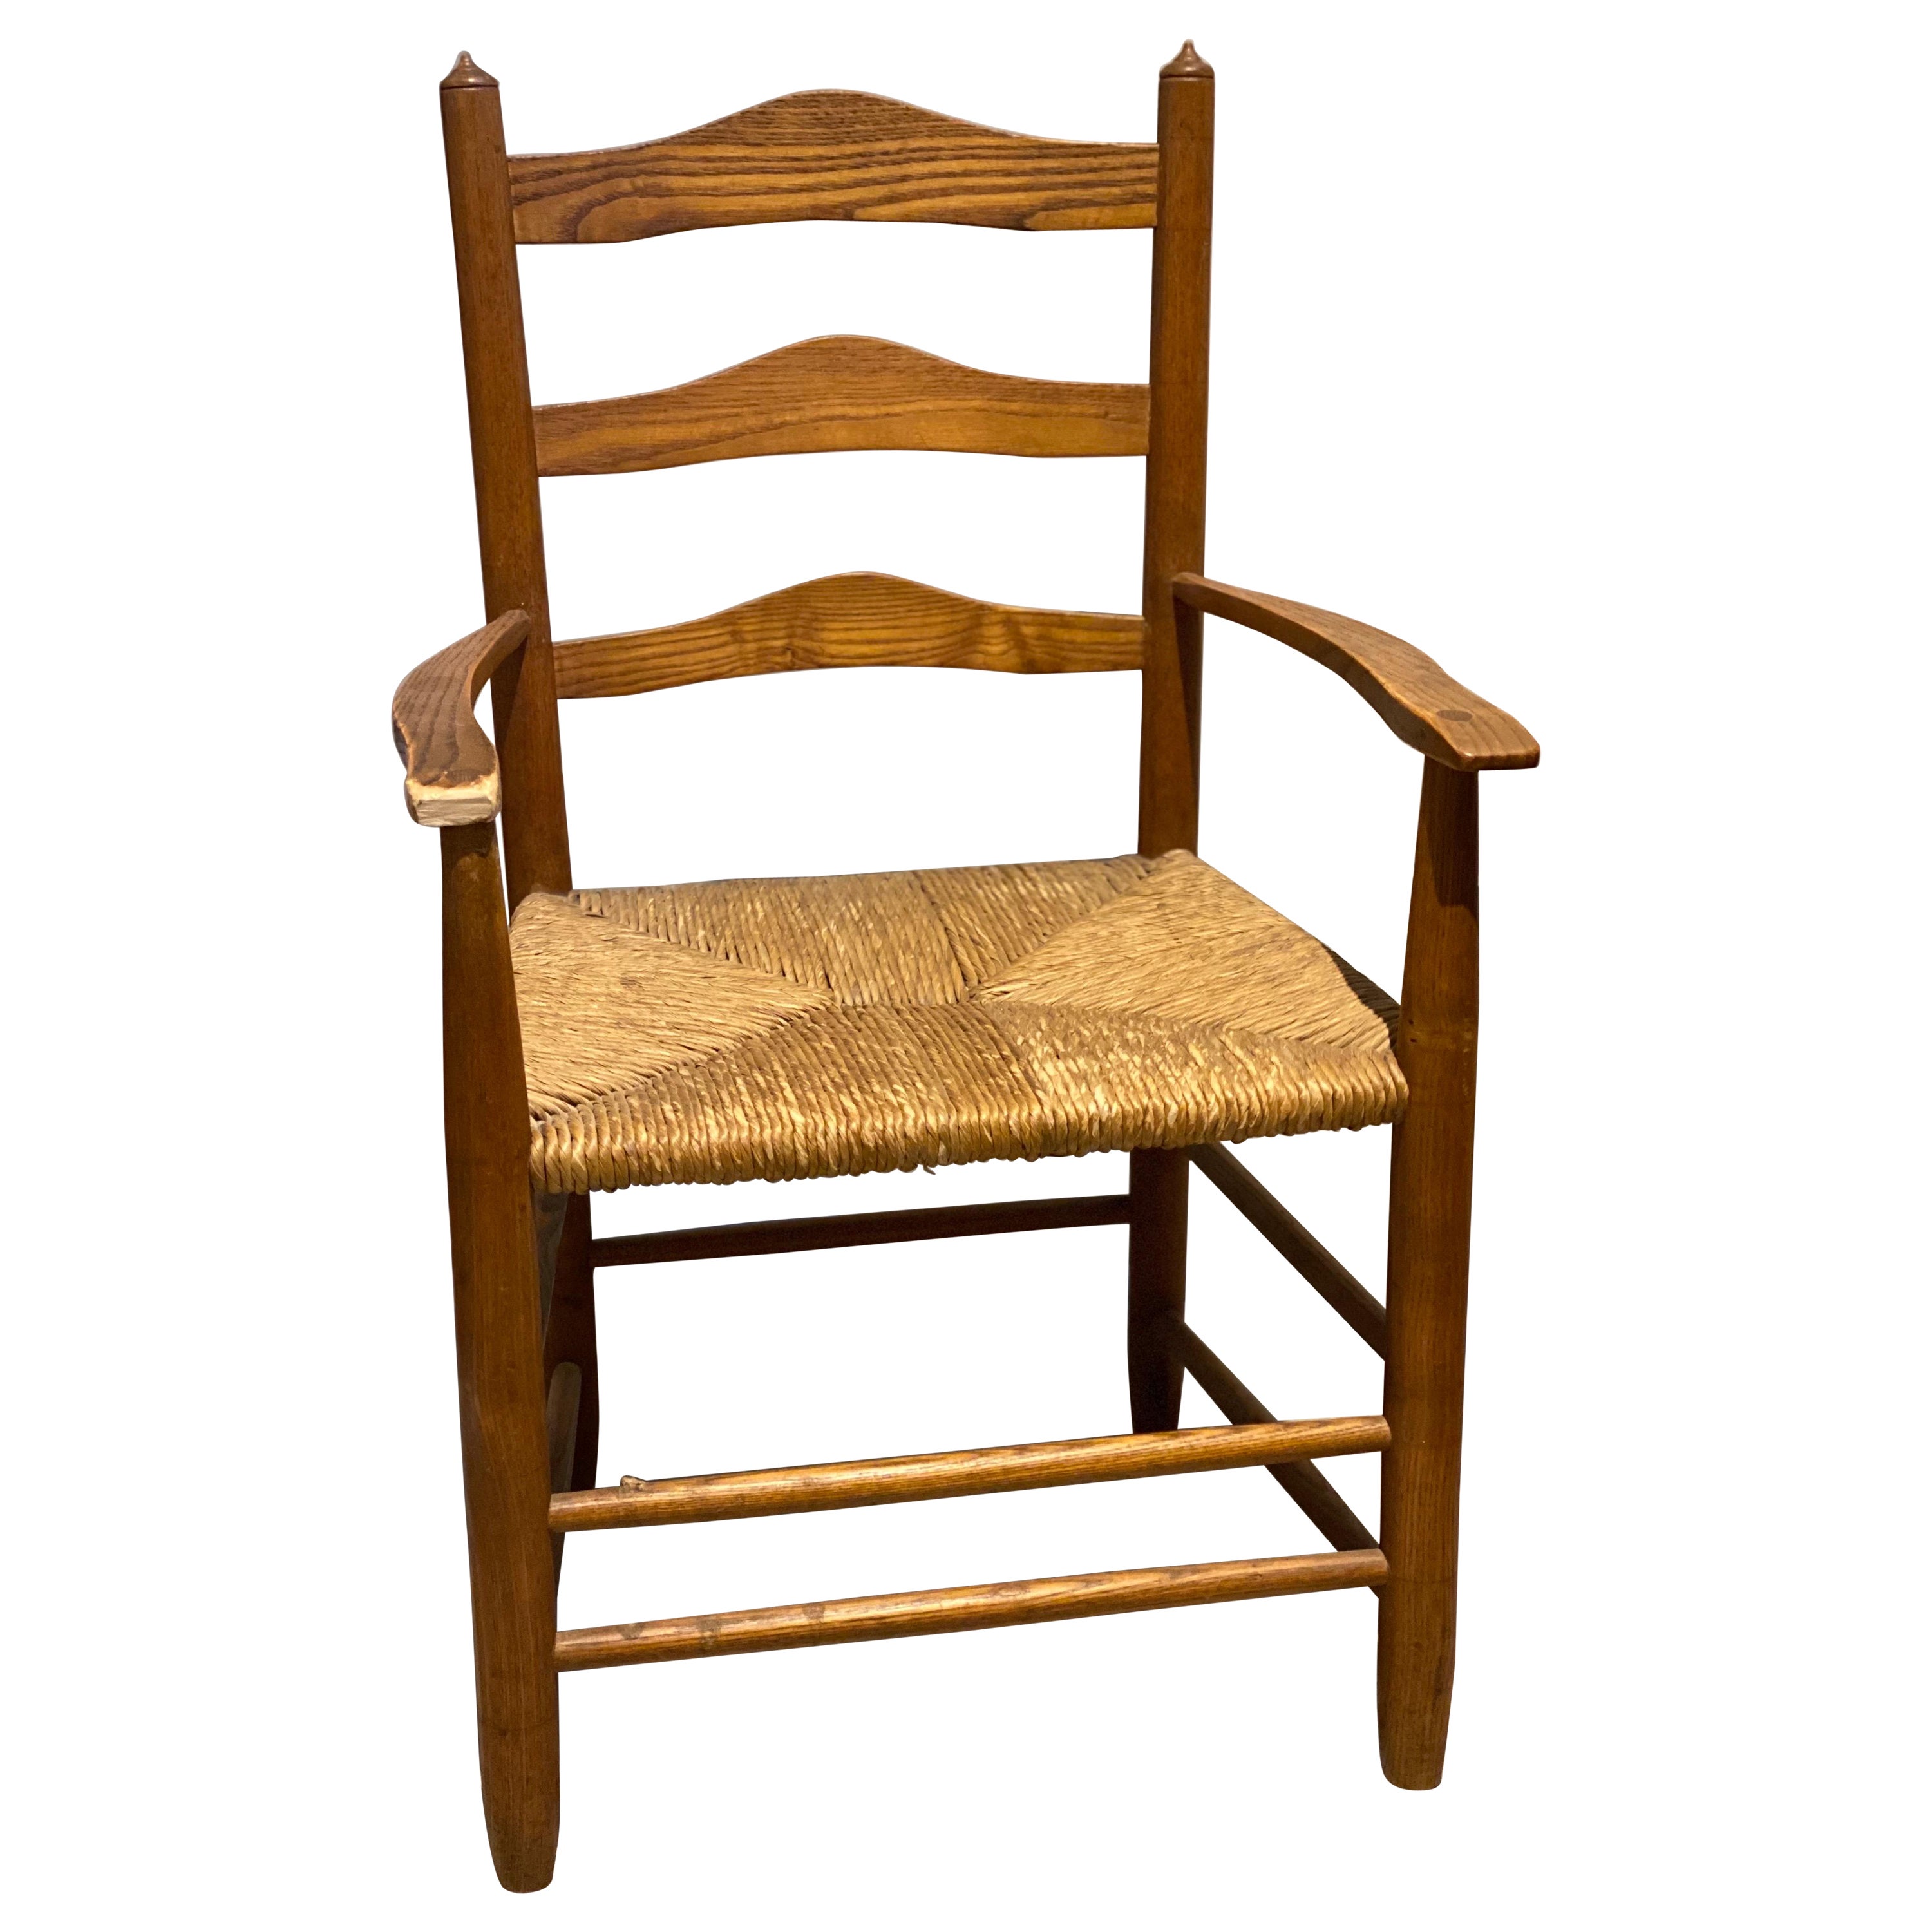 A Child's Wooden Chair with Handwoven Rush Seat, American For Sale